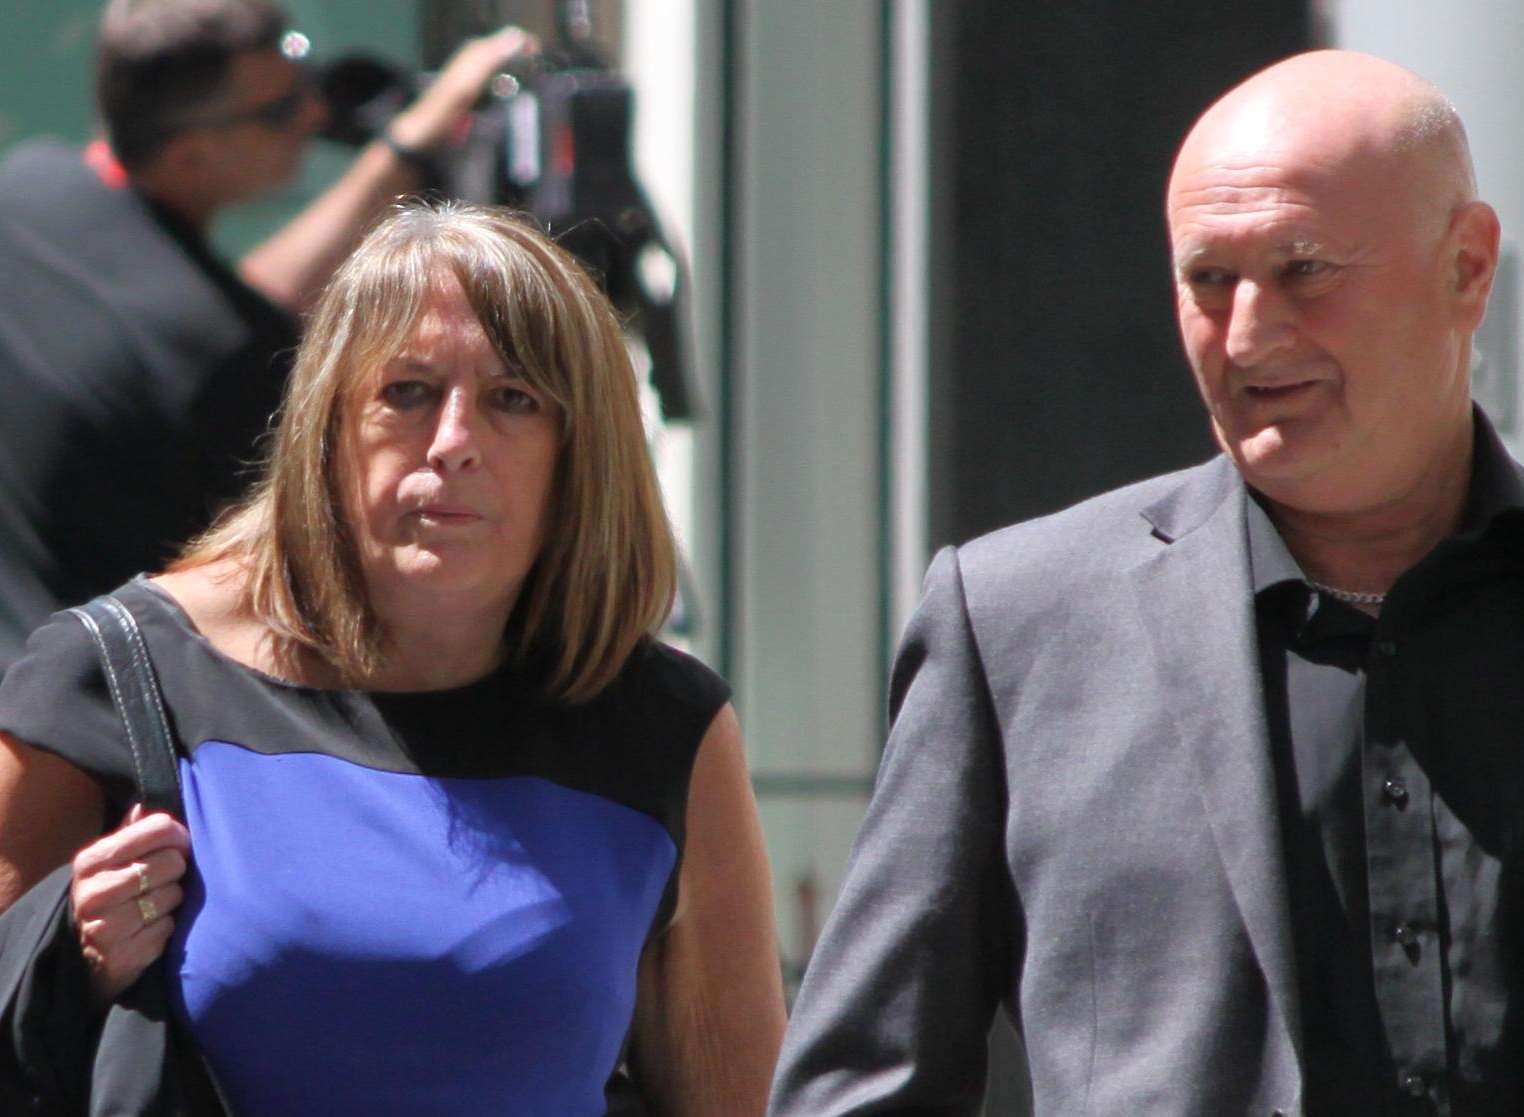 Georgina Leigh with her husband Desmond outside the High Court in London